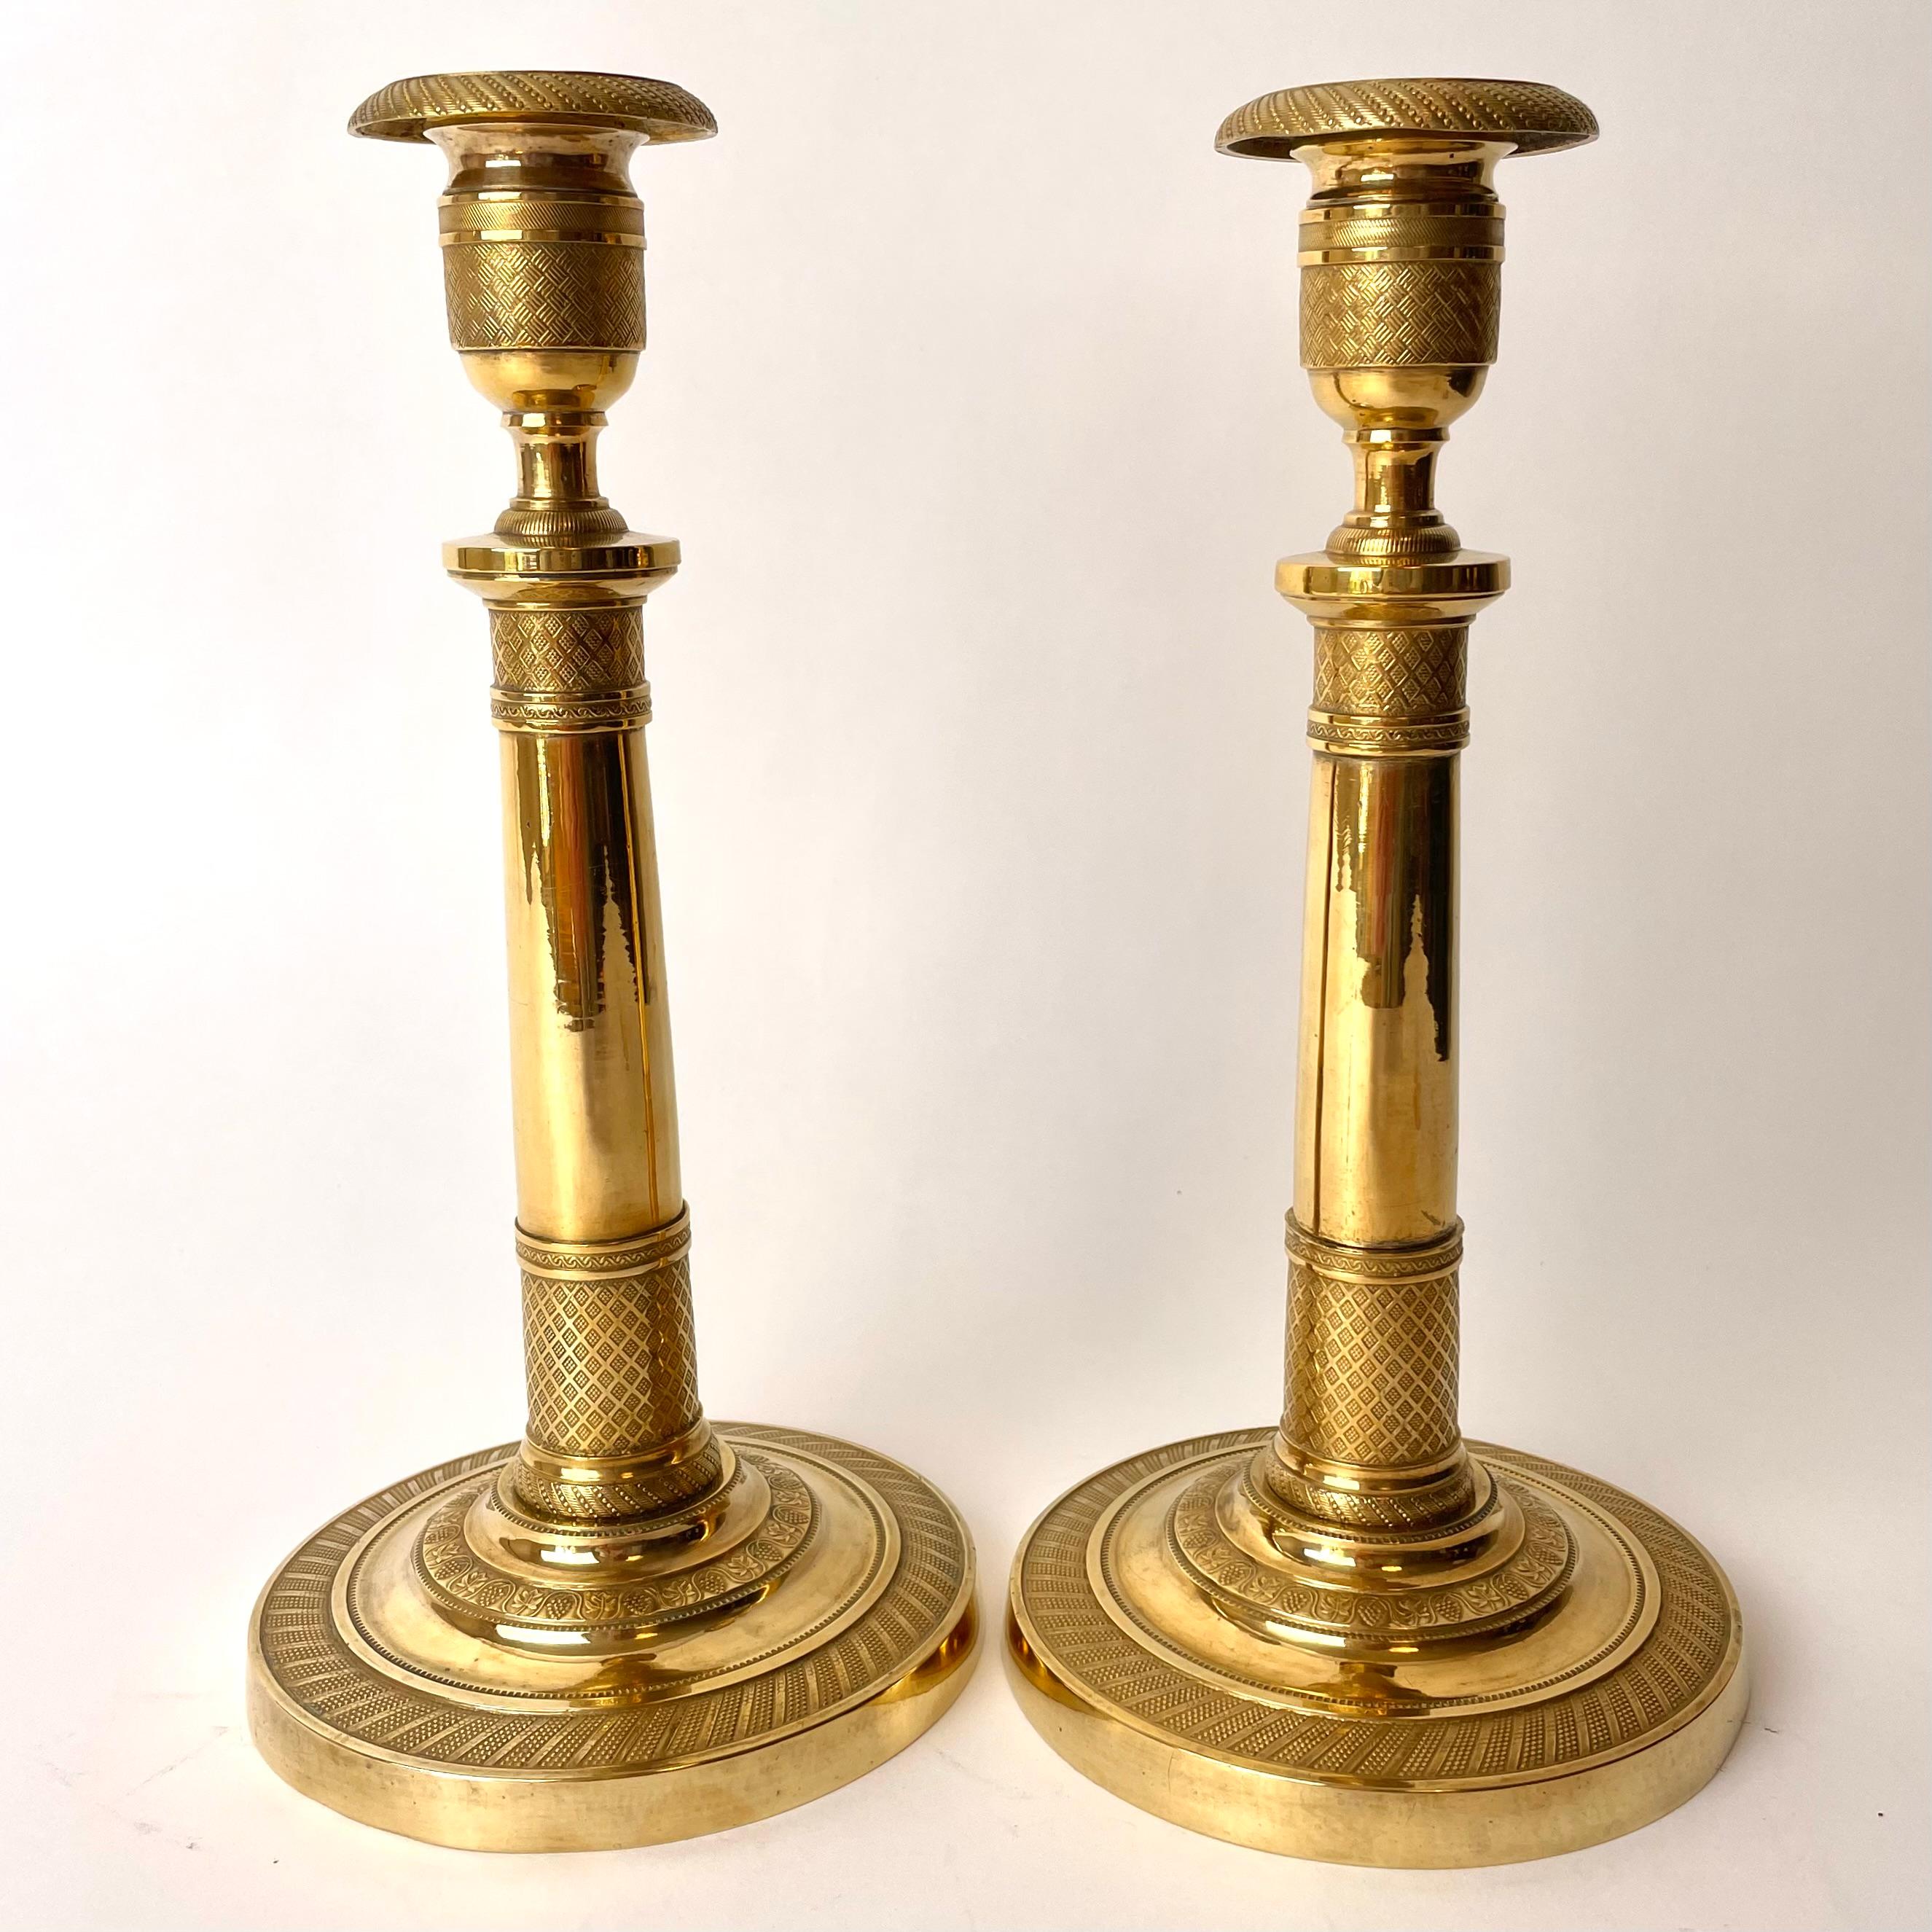 French Pair of Empire Candlesticks, Gilded Bronze, France, Early 19th Century